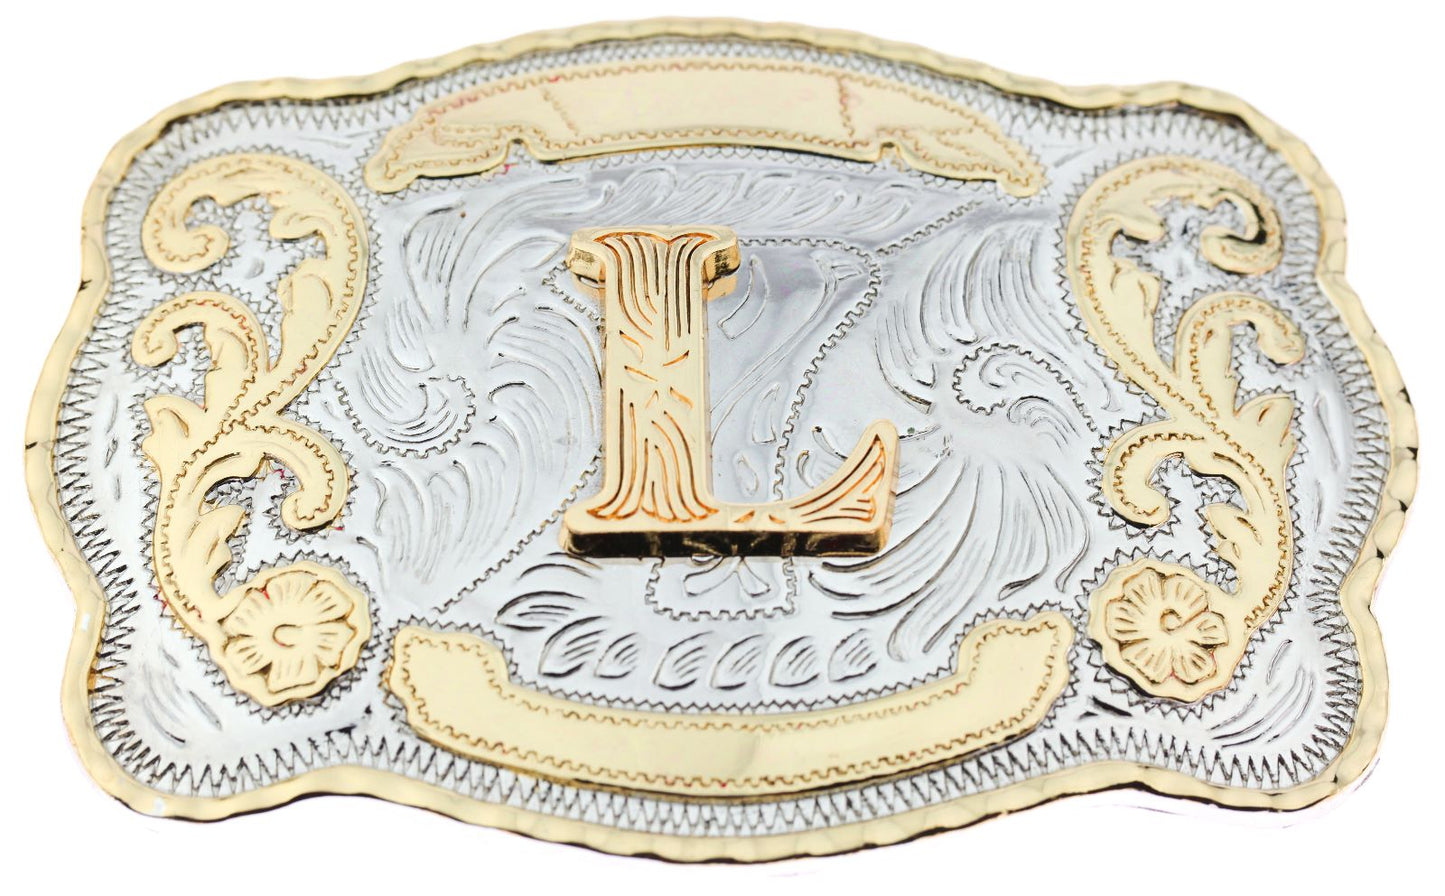 Initial Letter "L" Cowboy Rodeo Western Large Gold Tone Belt Buckle